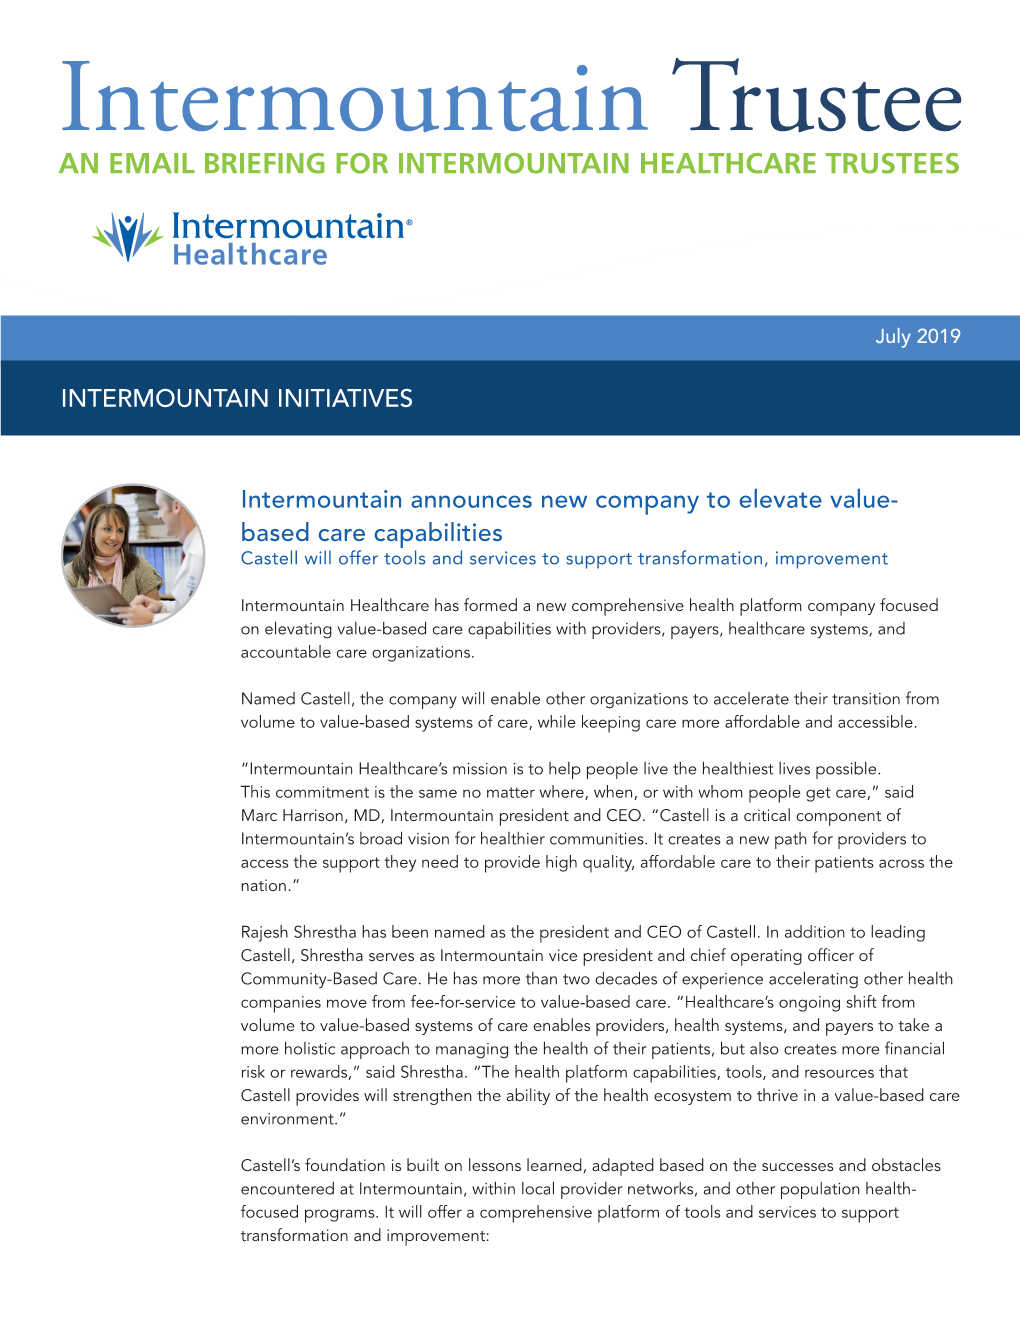 An Email Briefing for Intermountain Healthcare Trustees